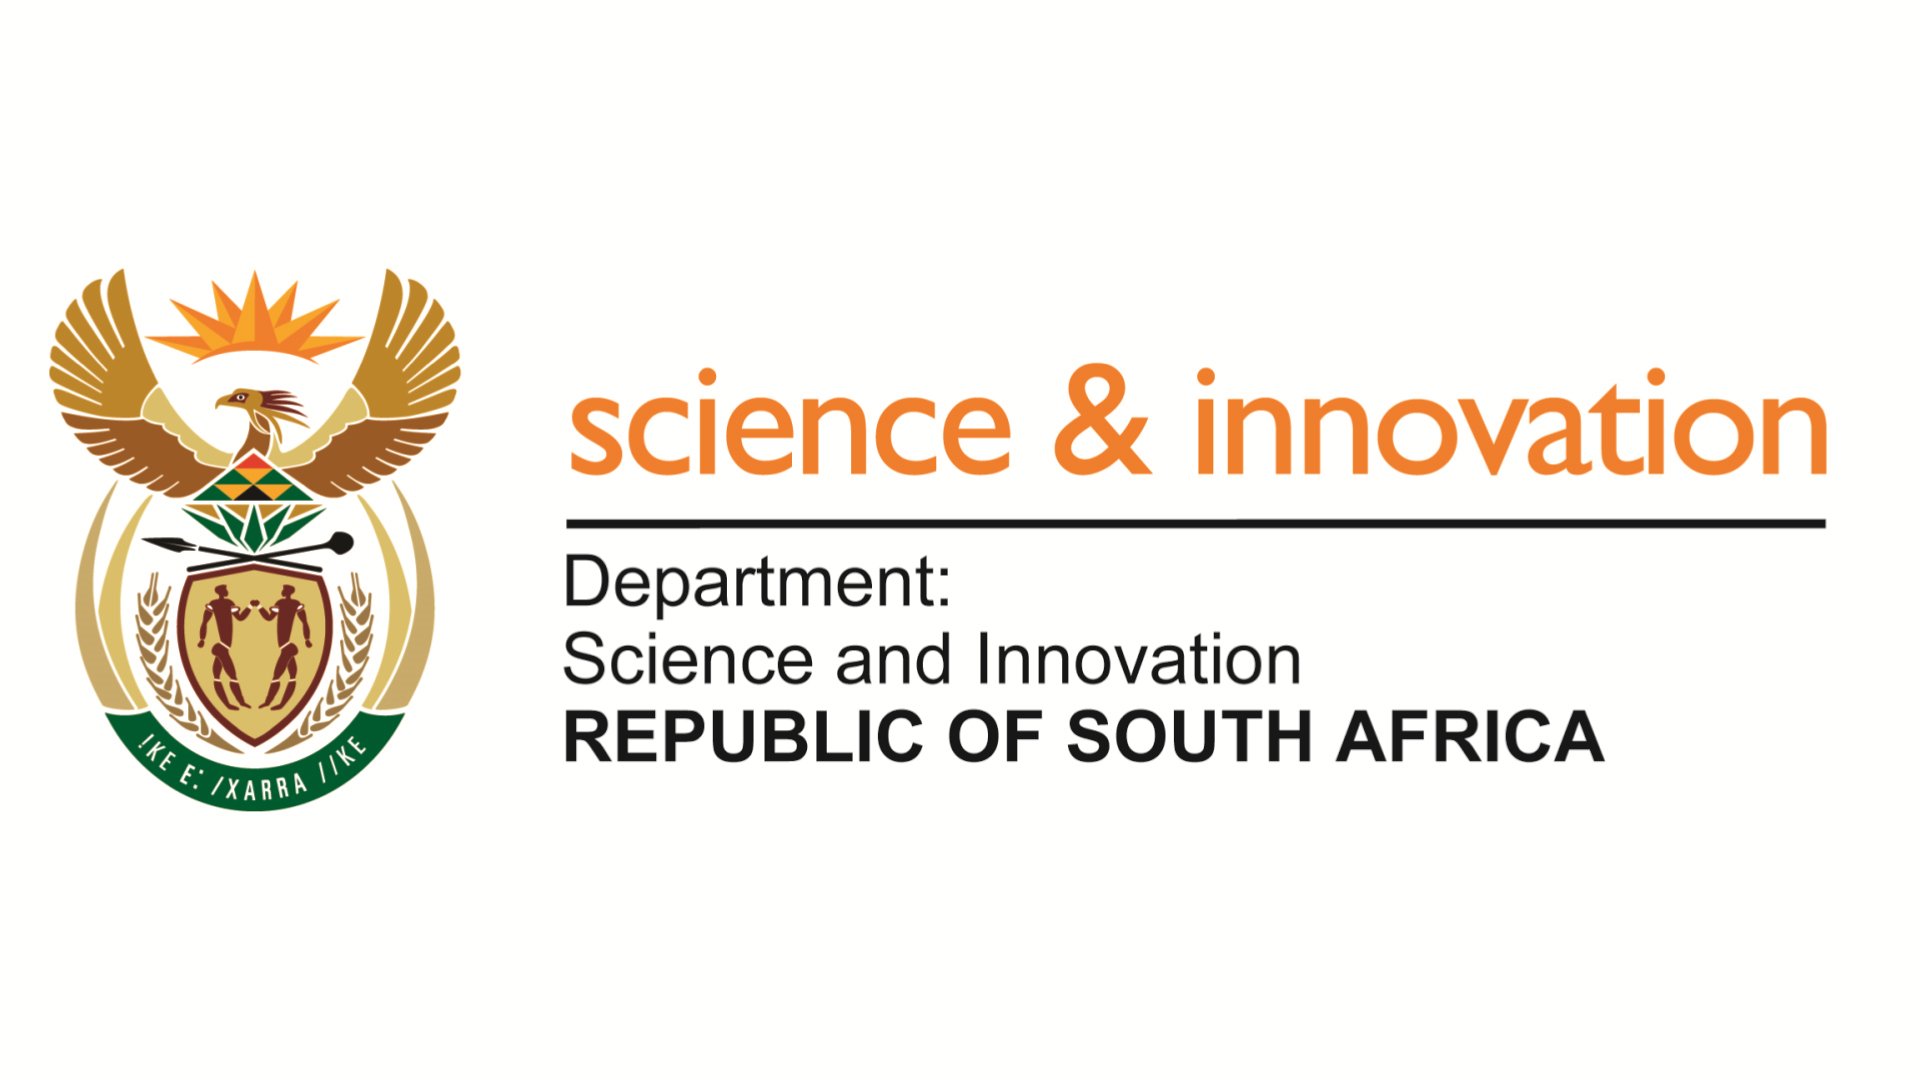 Department of Science and Innovation logo